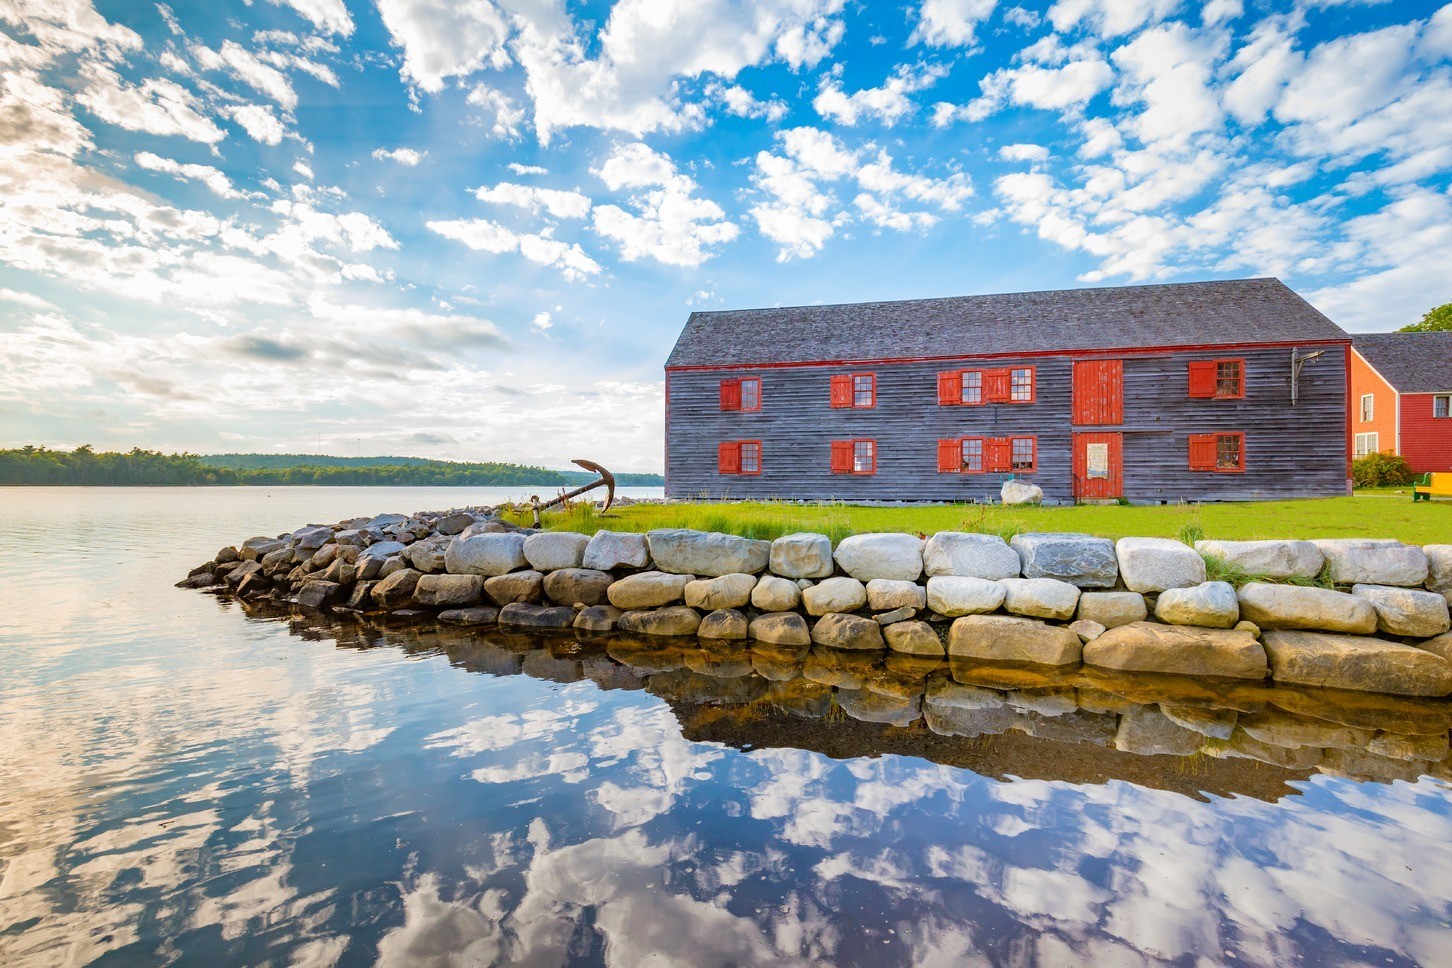 One of the best things to do in Shelburne is to visit the historic waterfront